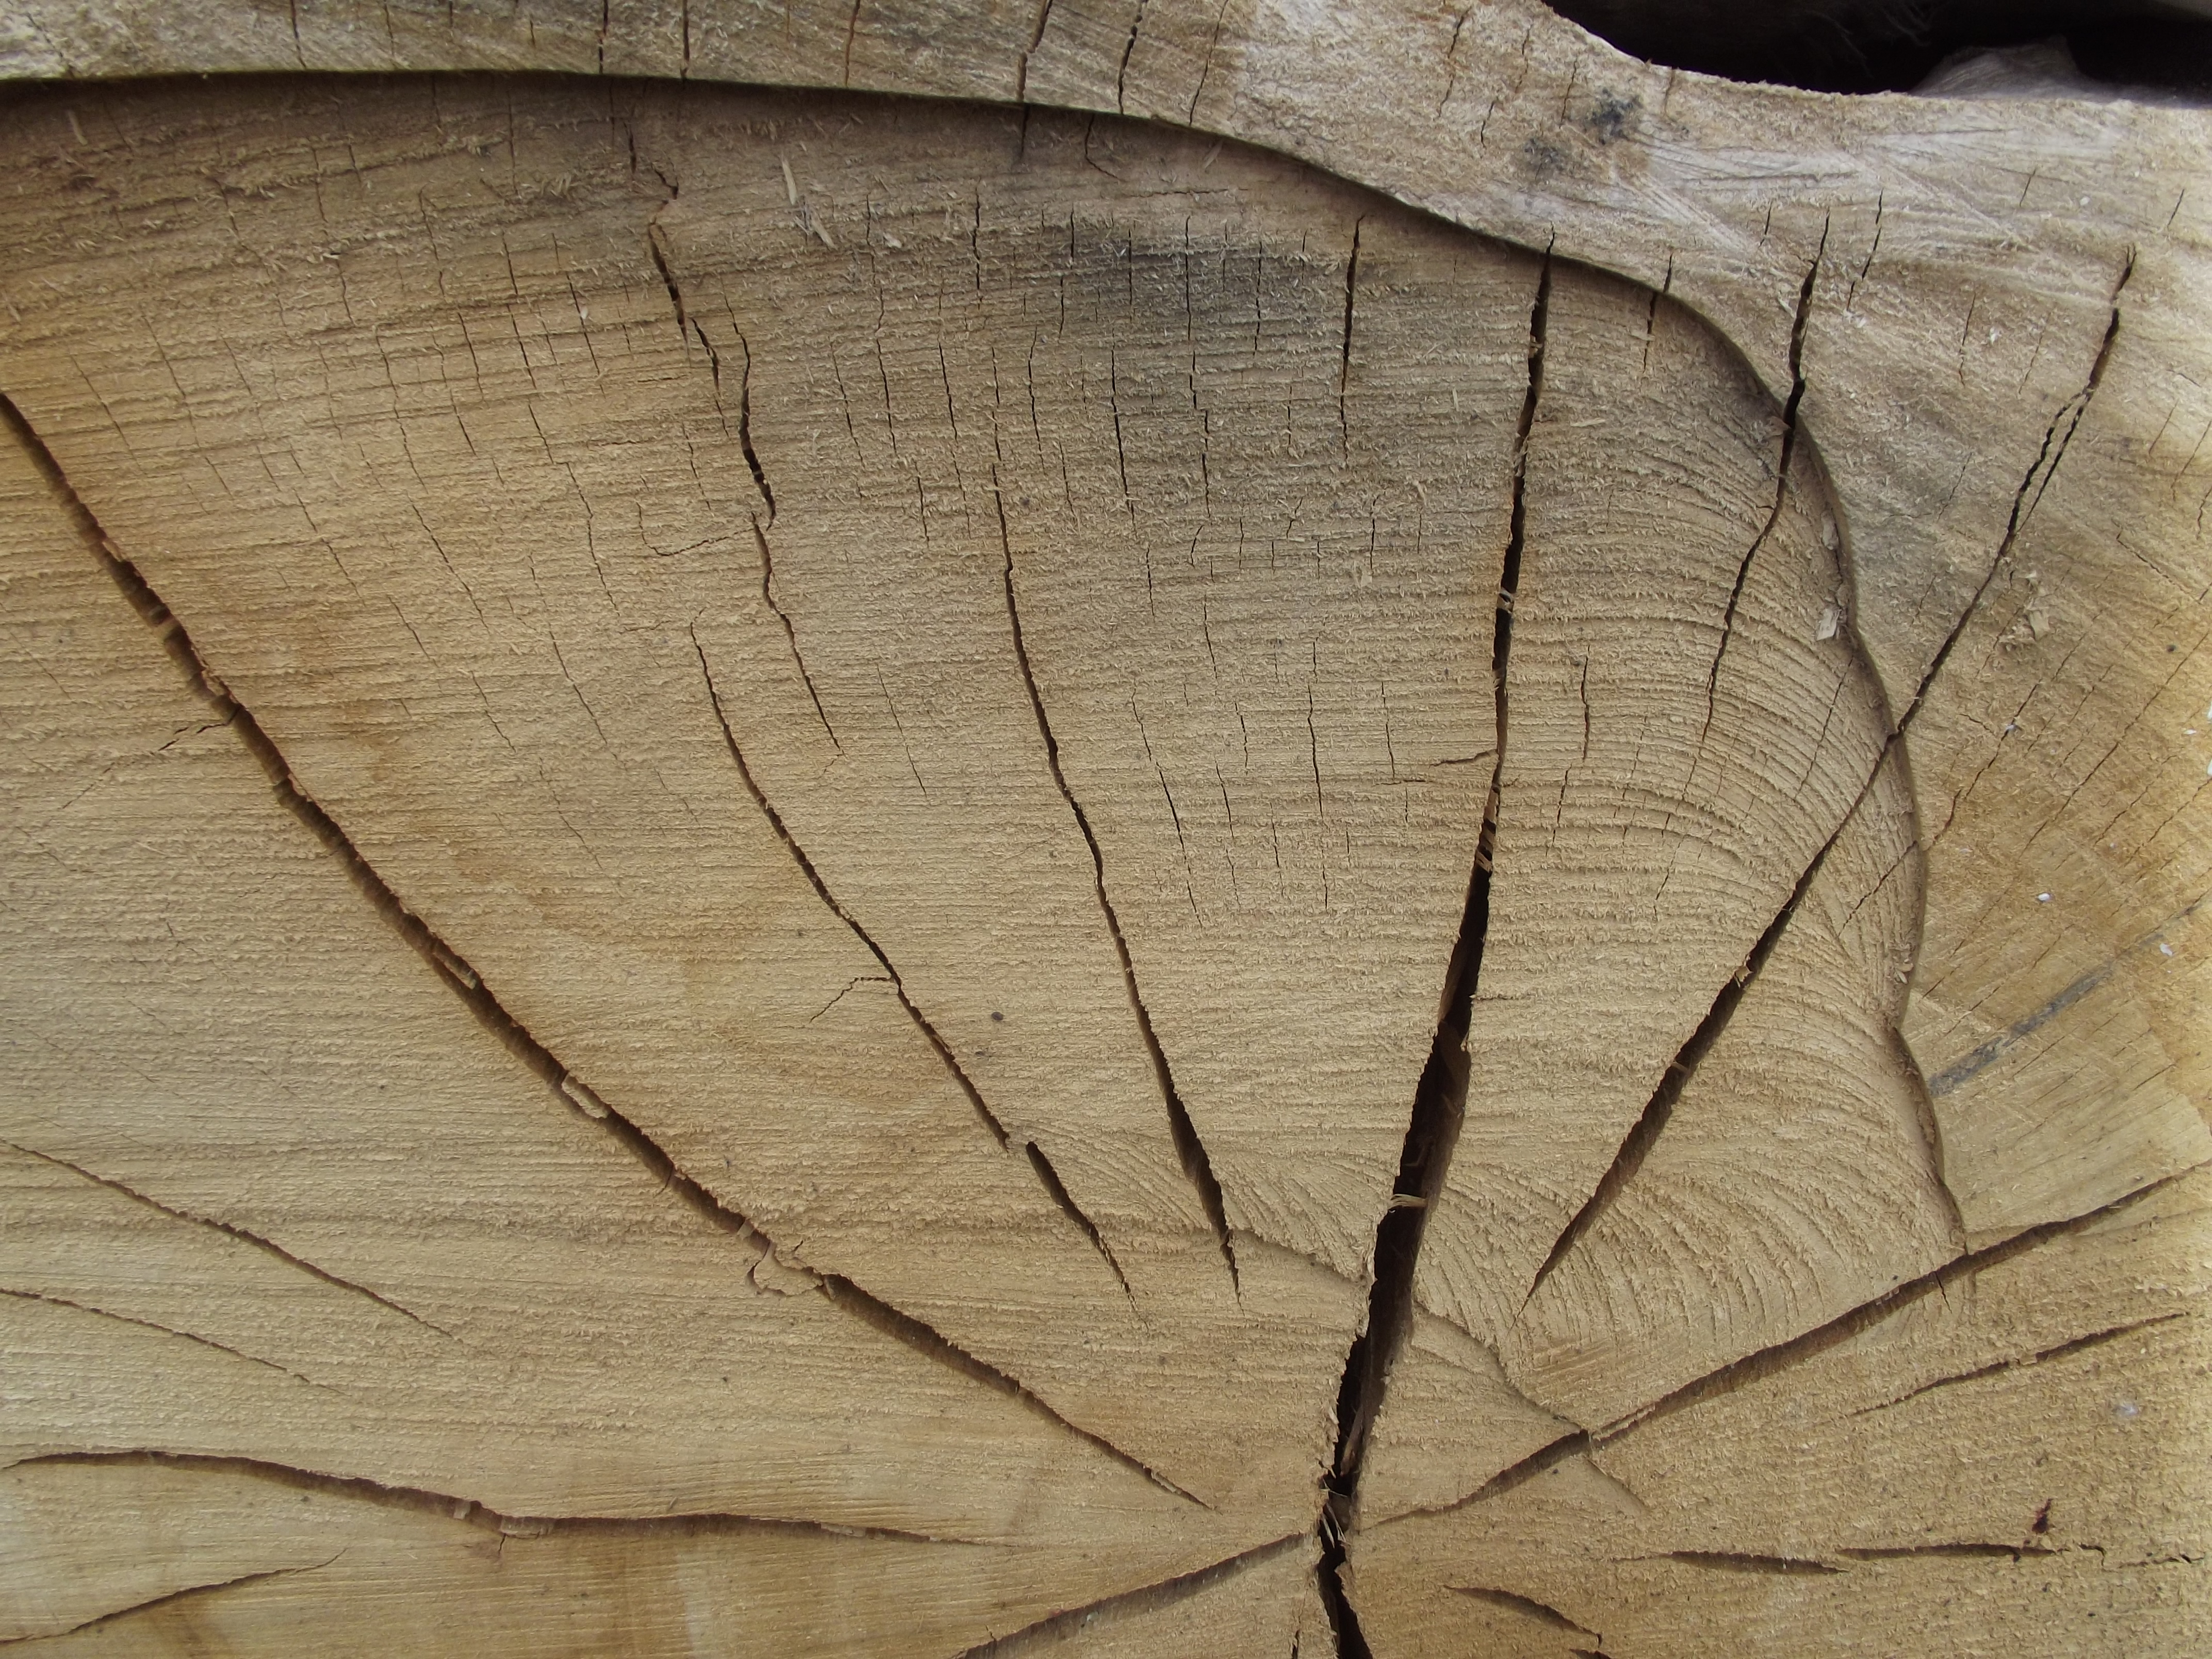 Cracked Wood, Cracked, Dry, Stump, Texture, HQ Photo